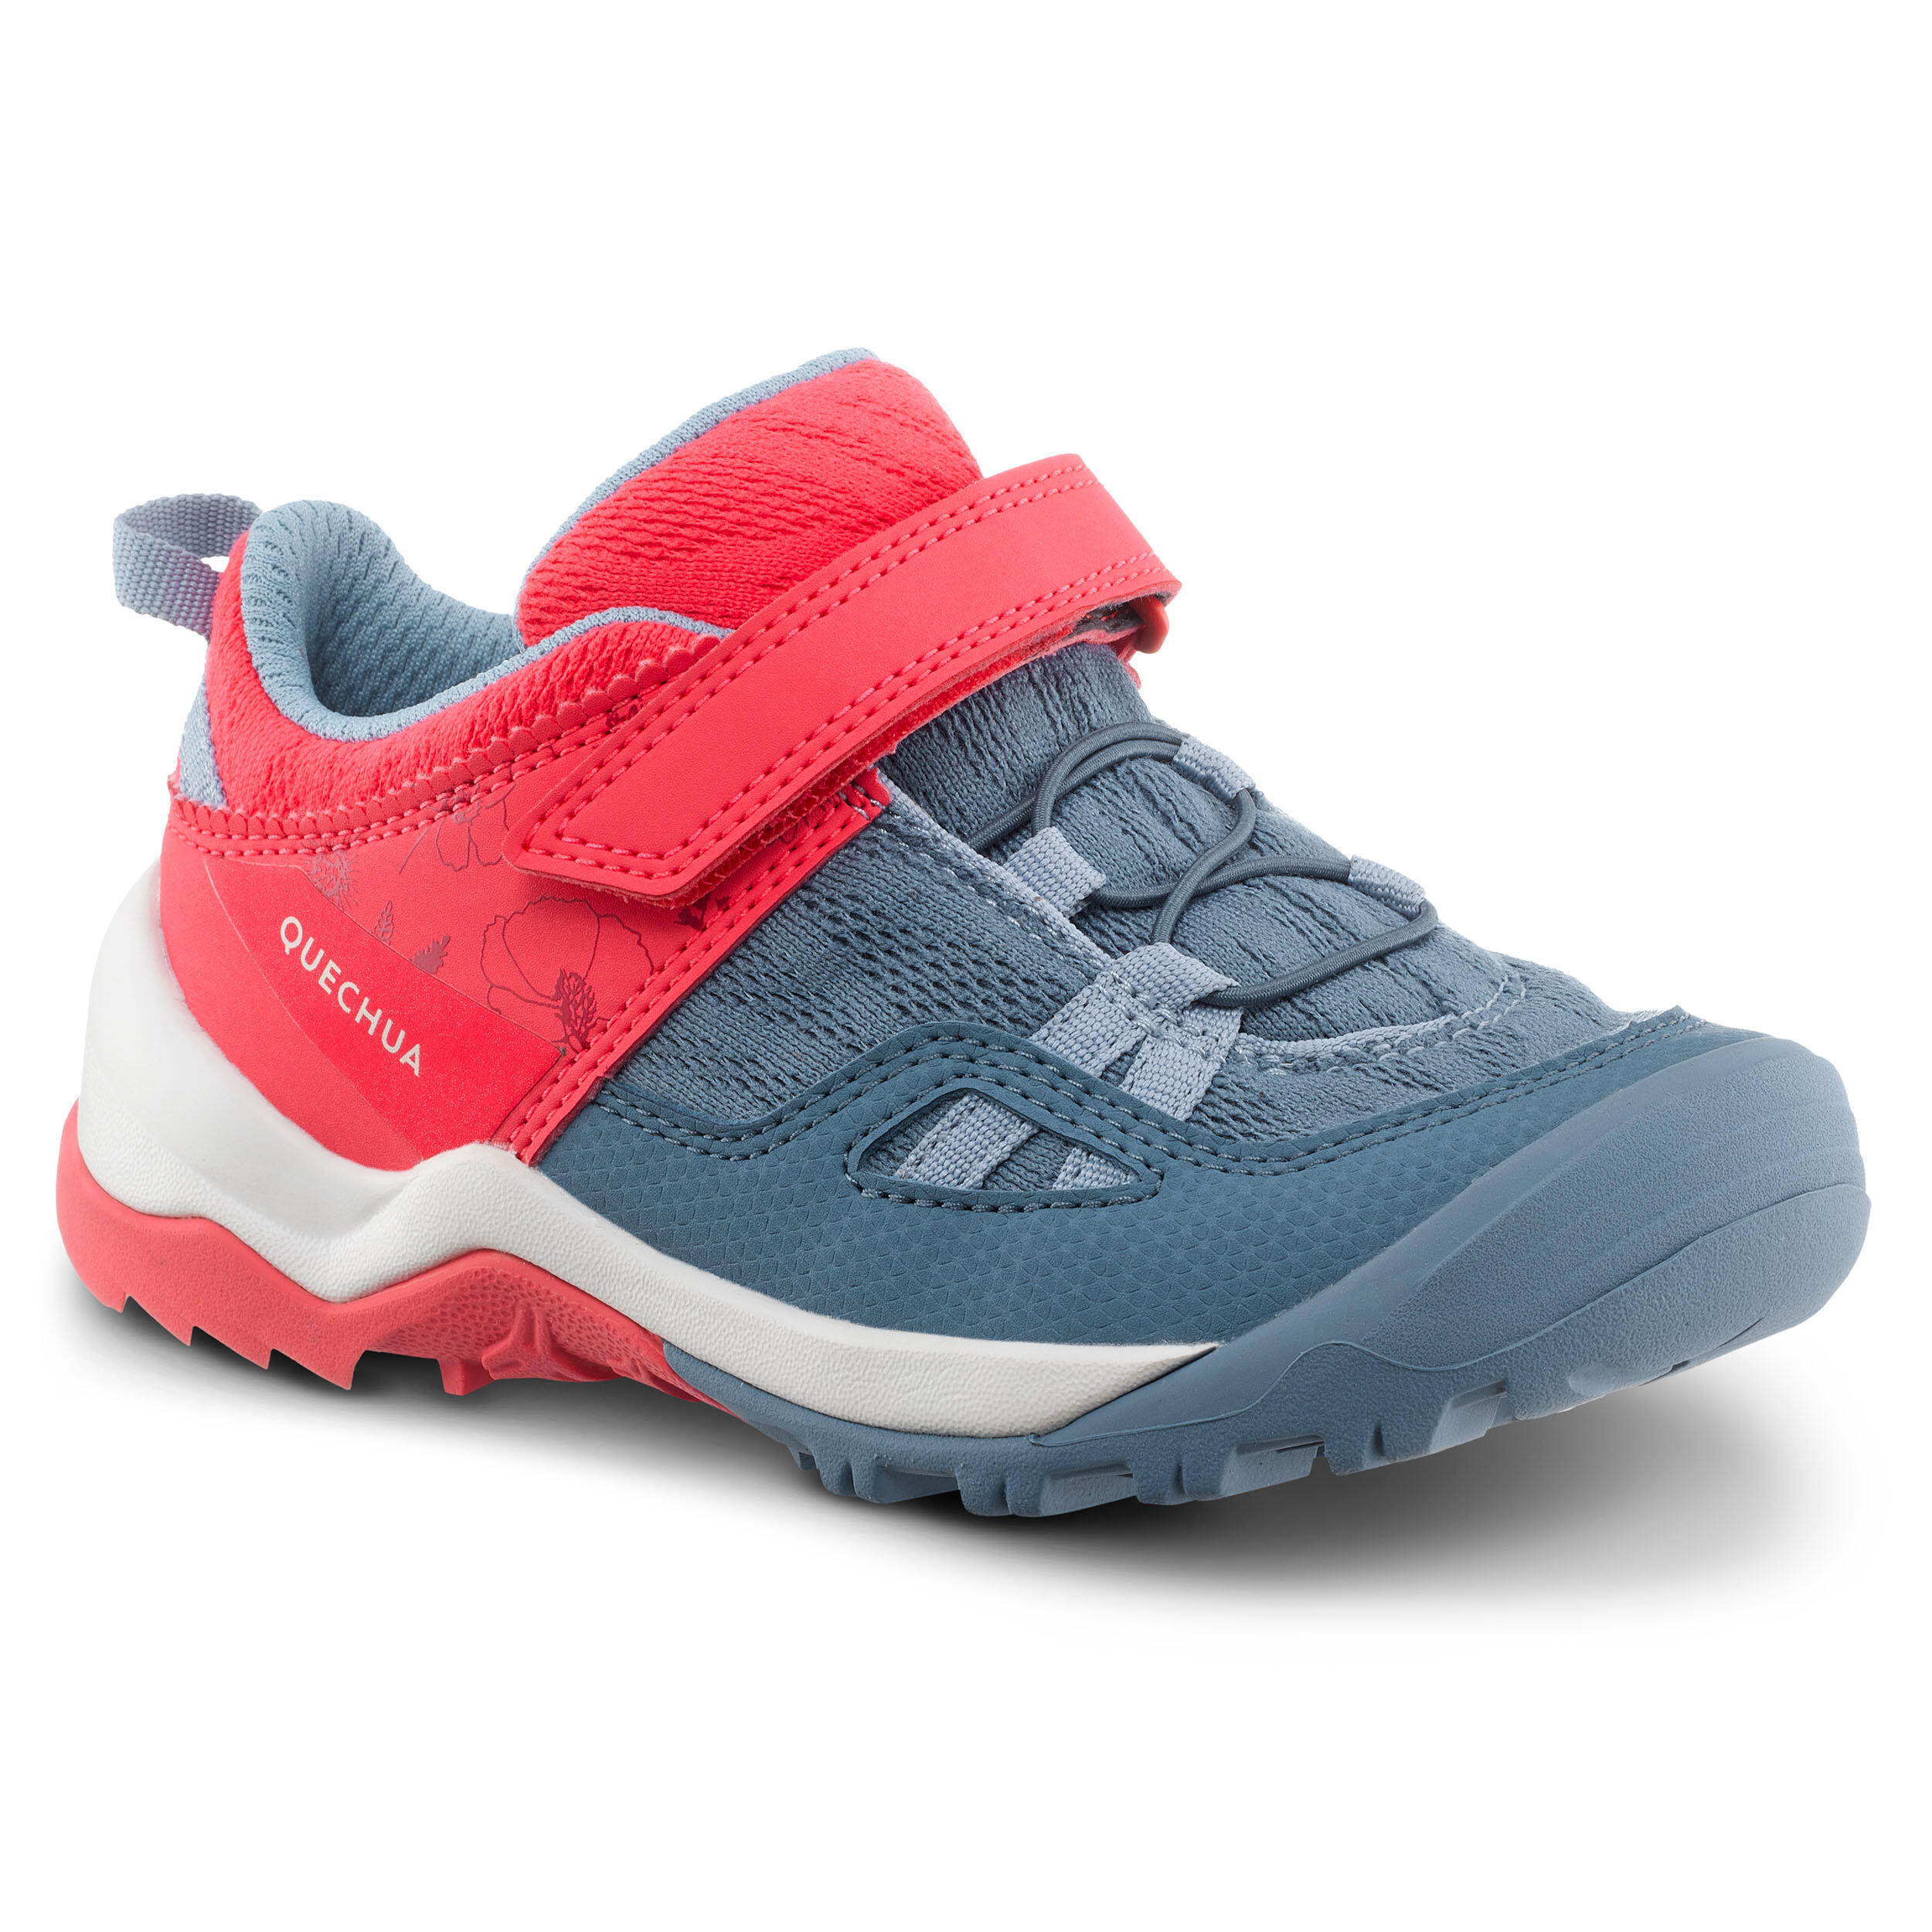 Refurbished Kids Hiking Shoes with rip-tab Crossrock-A Grade 5/6